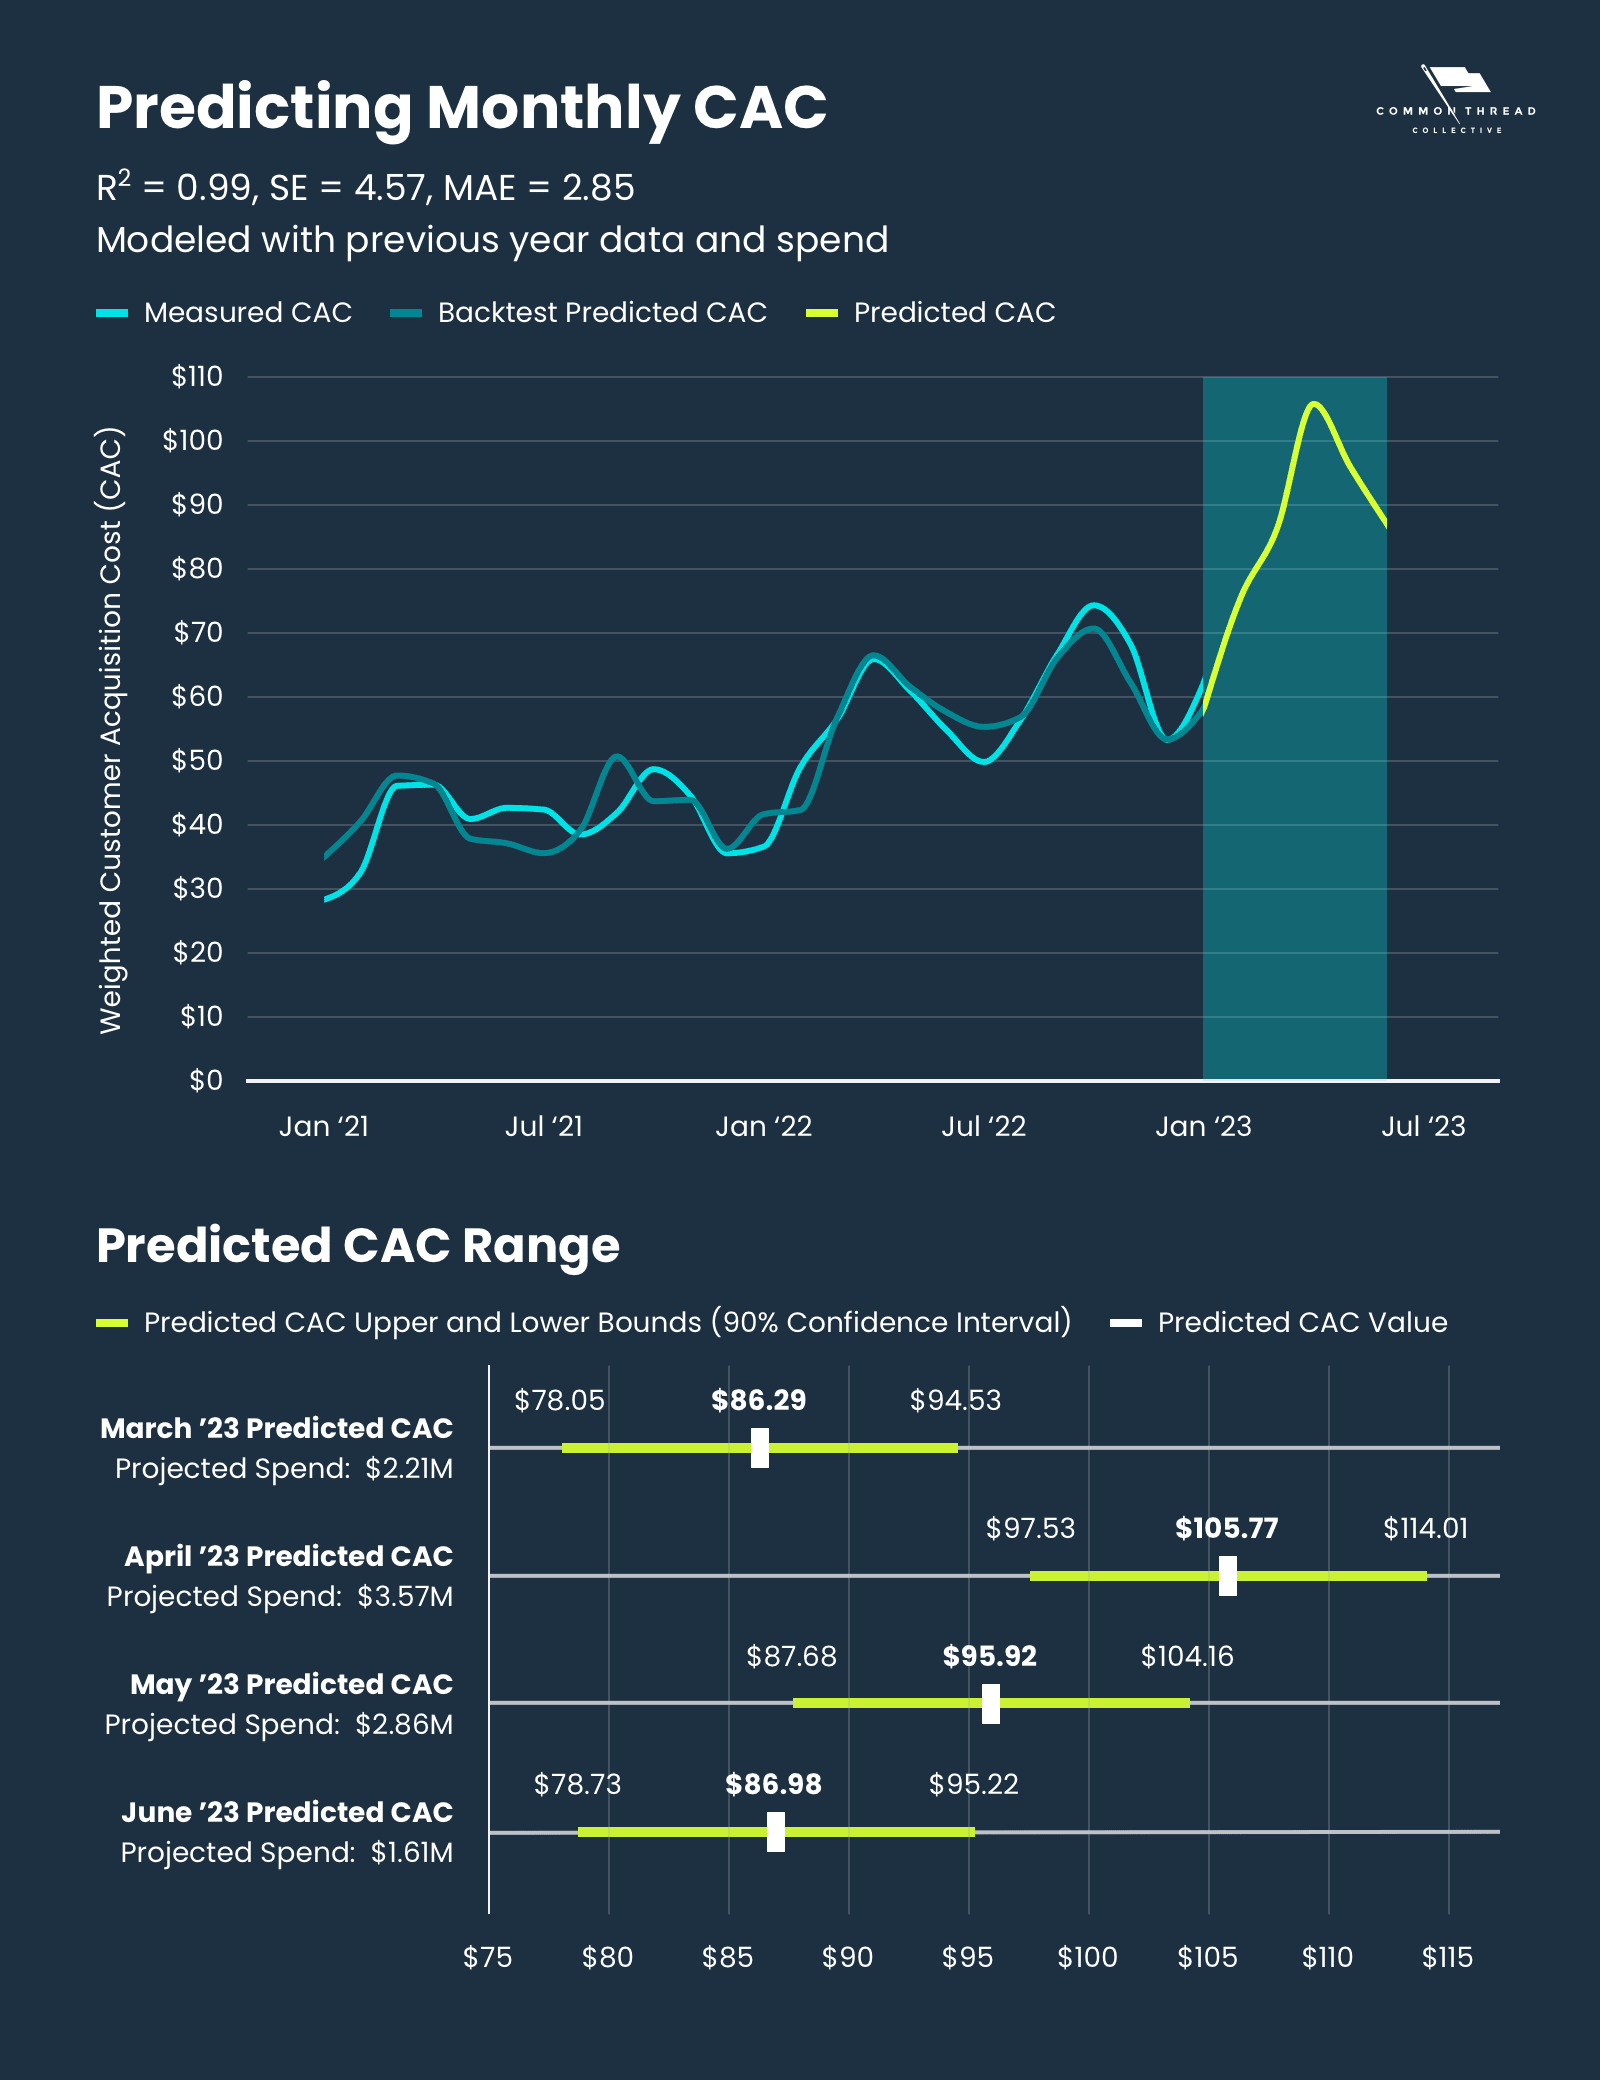 Predicting monthly CAC with a 90% confidence interval